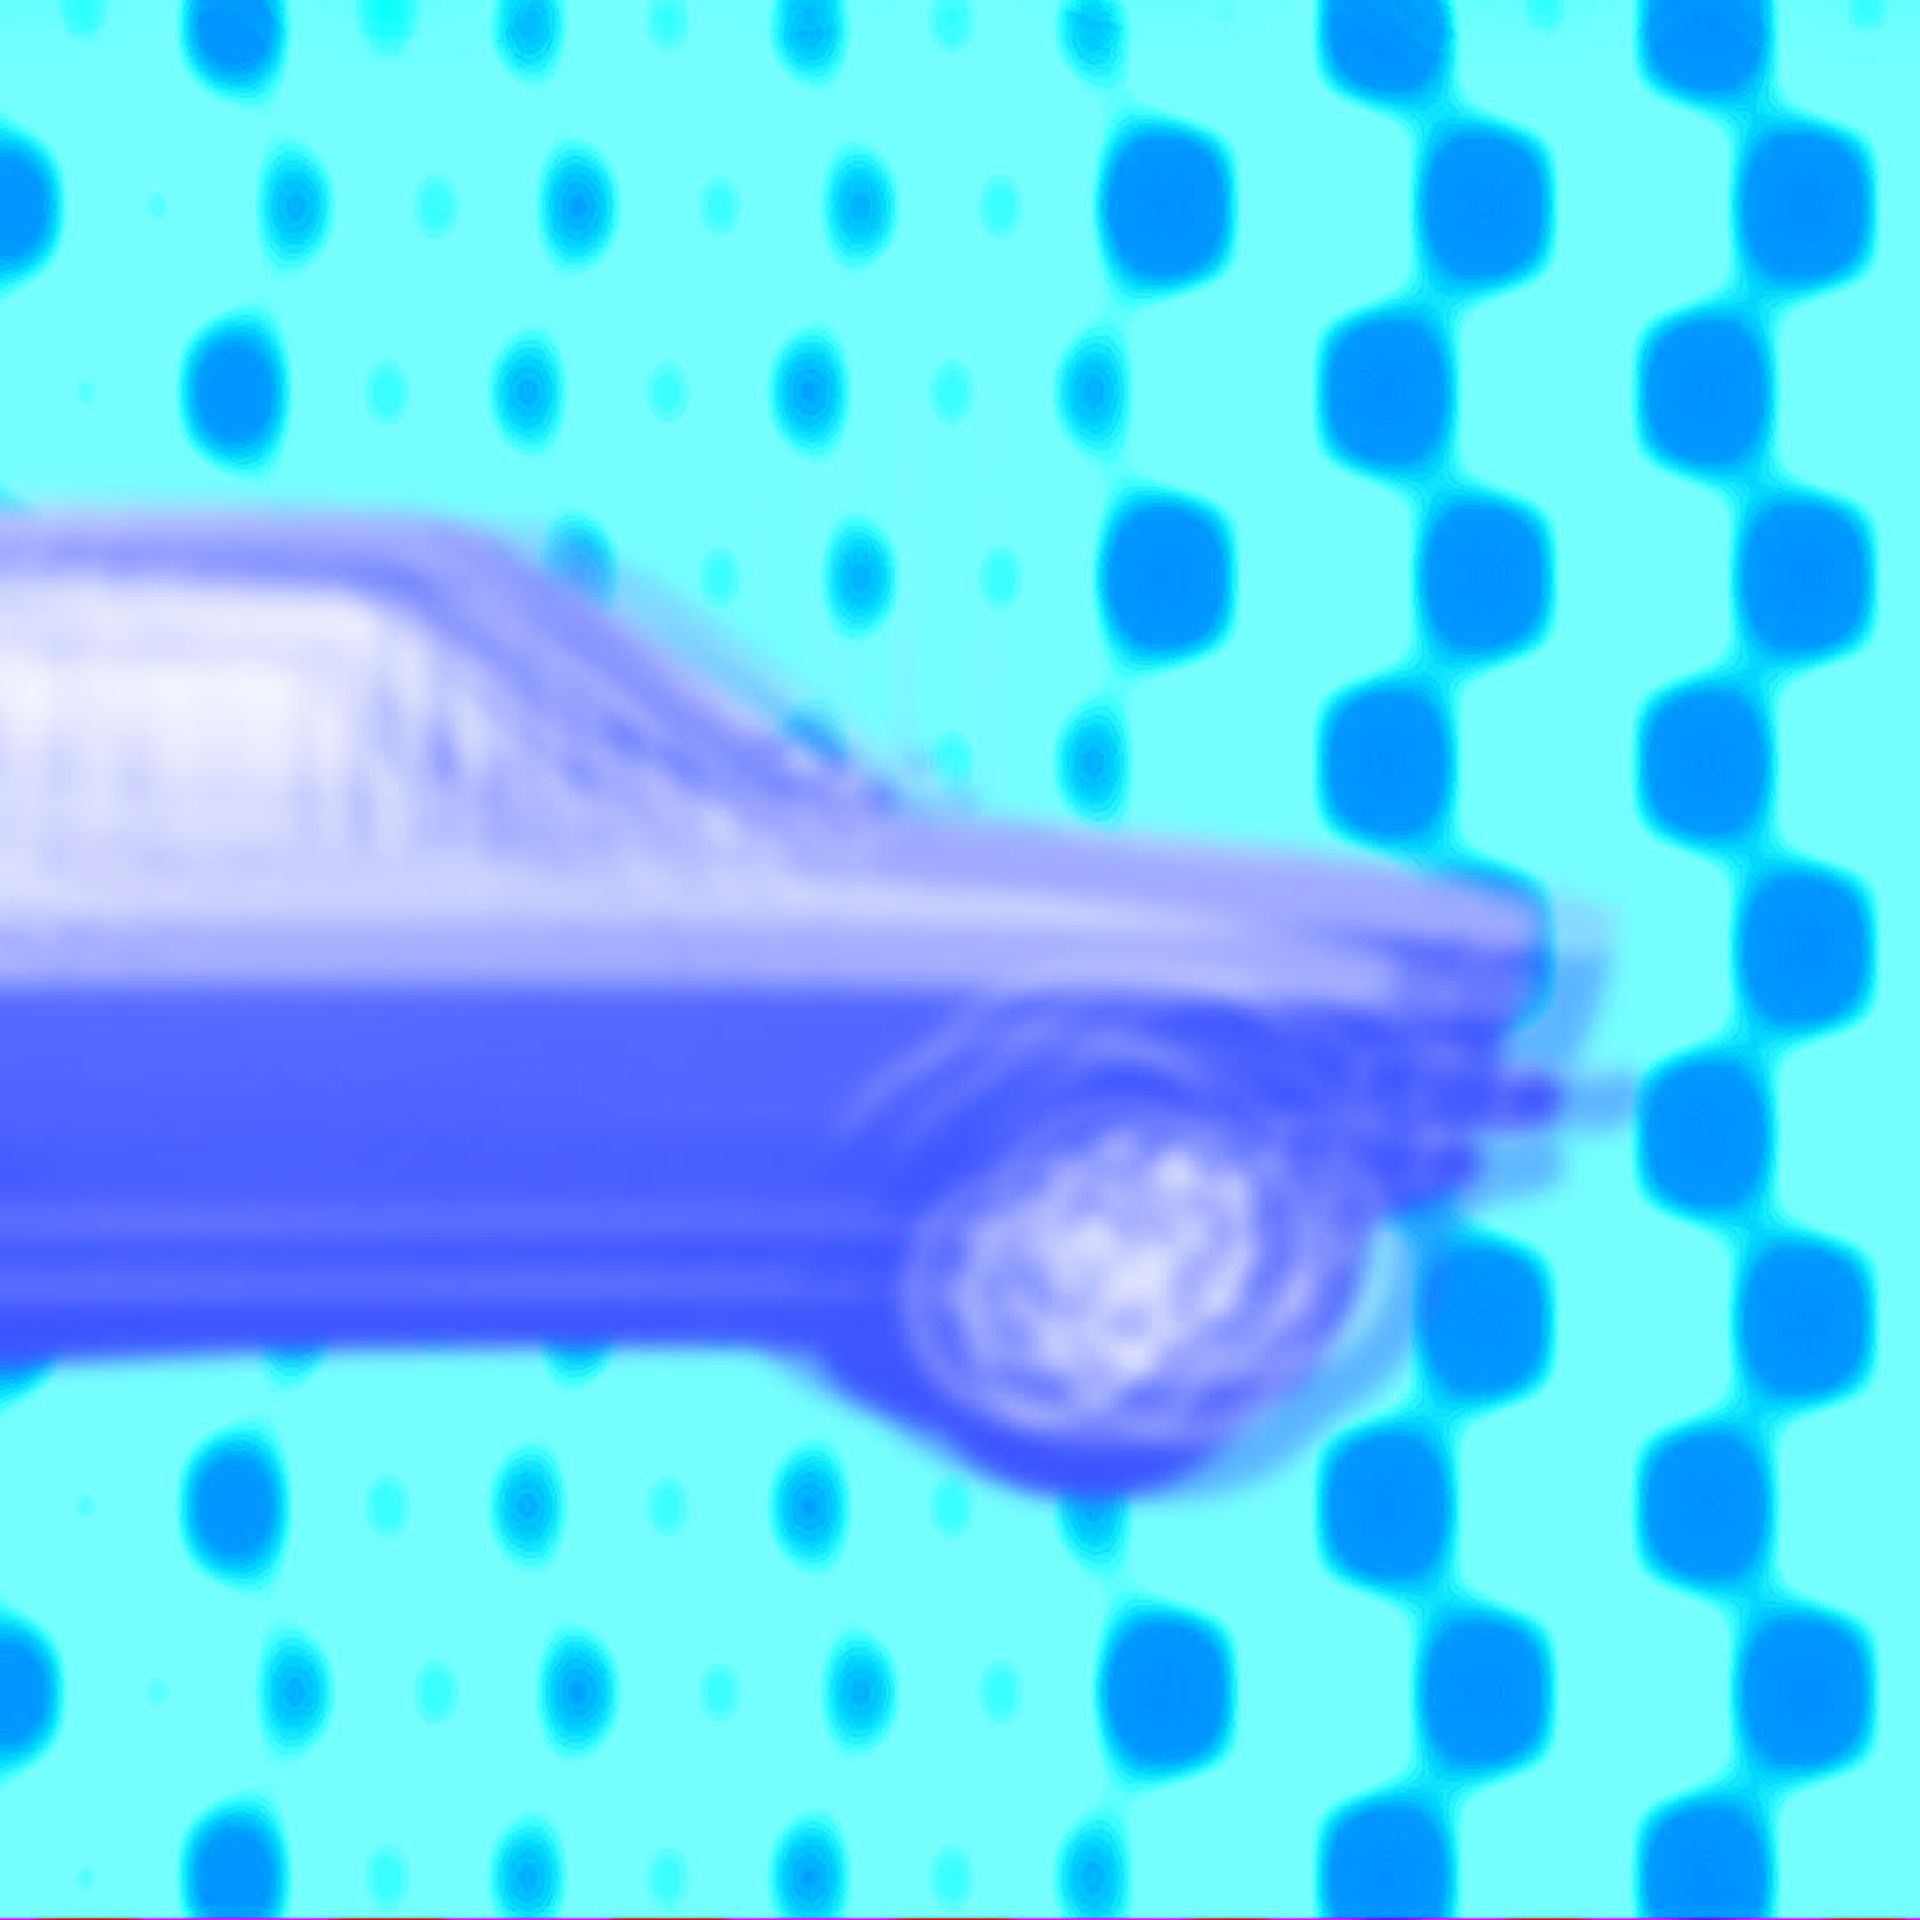 blurry illustrated car against a background of dots